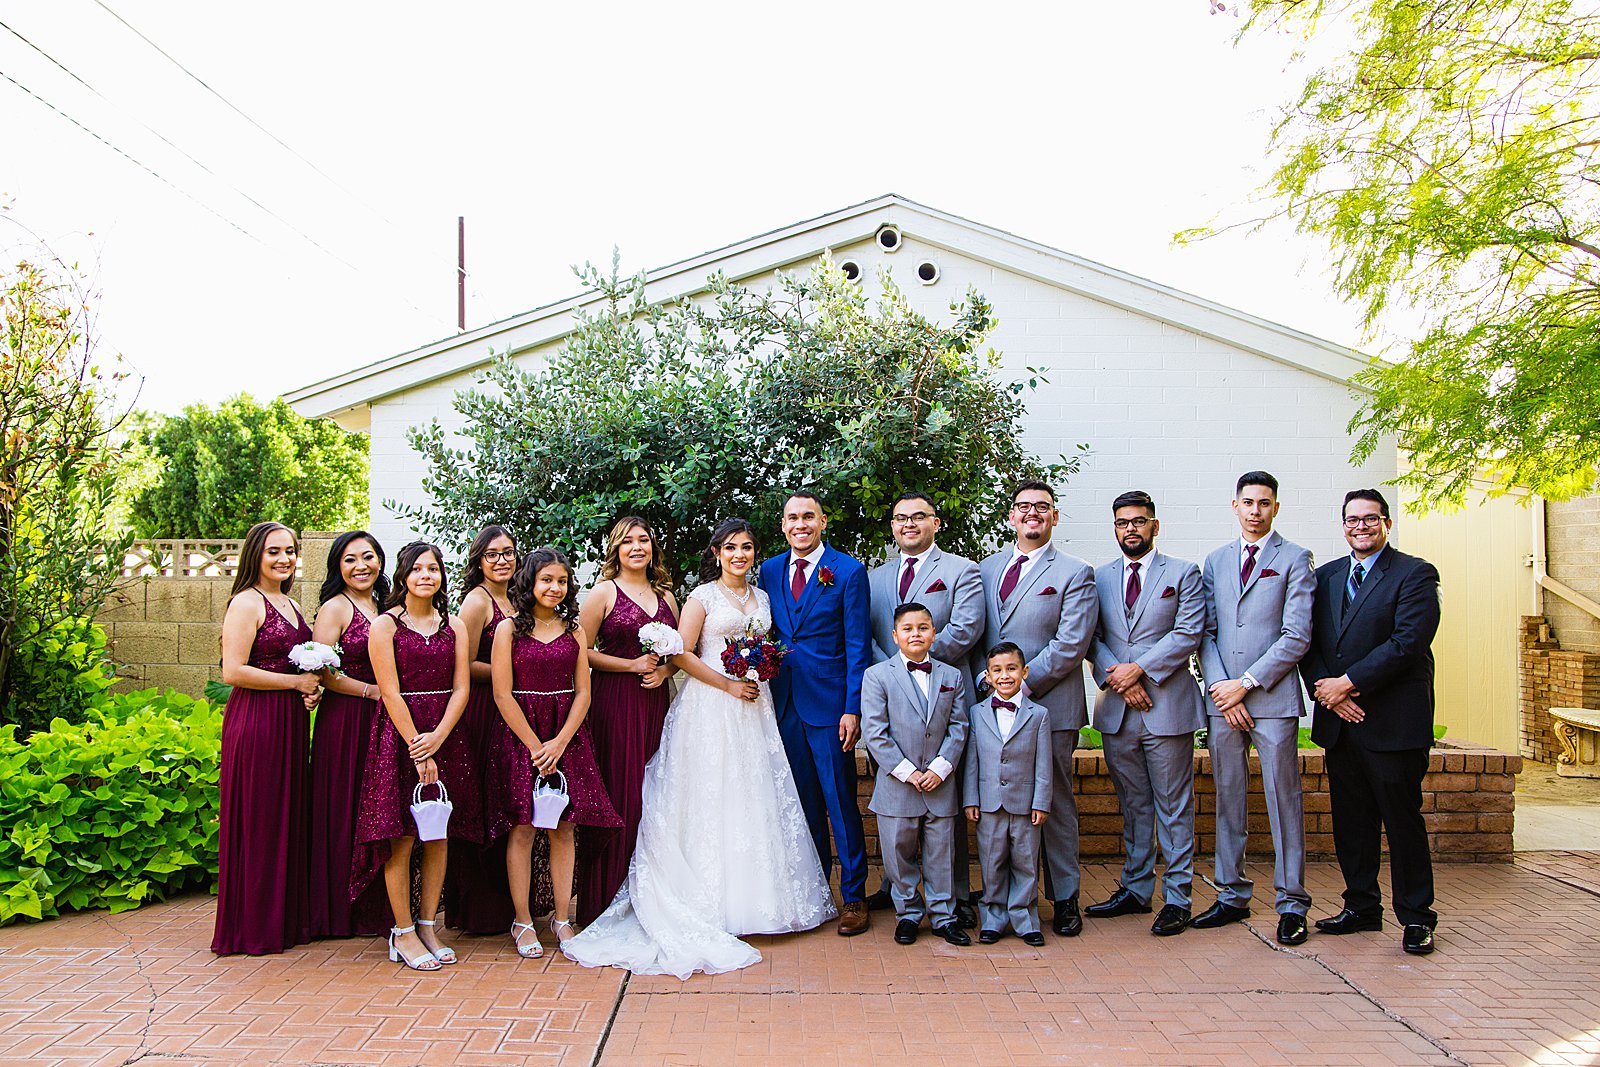 Bridal party together at a Valley Garden Center wedding by Arizona wedding photographer PMA Photography.